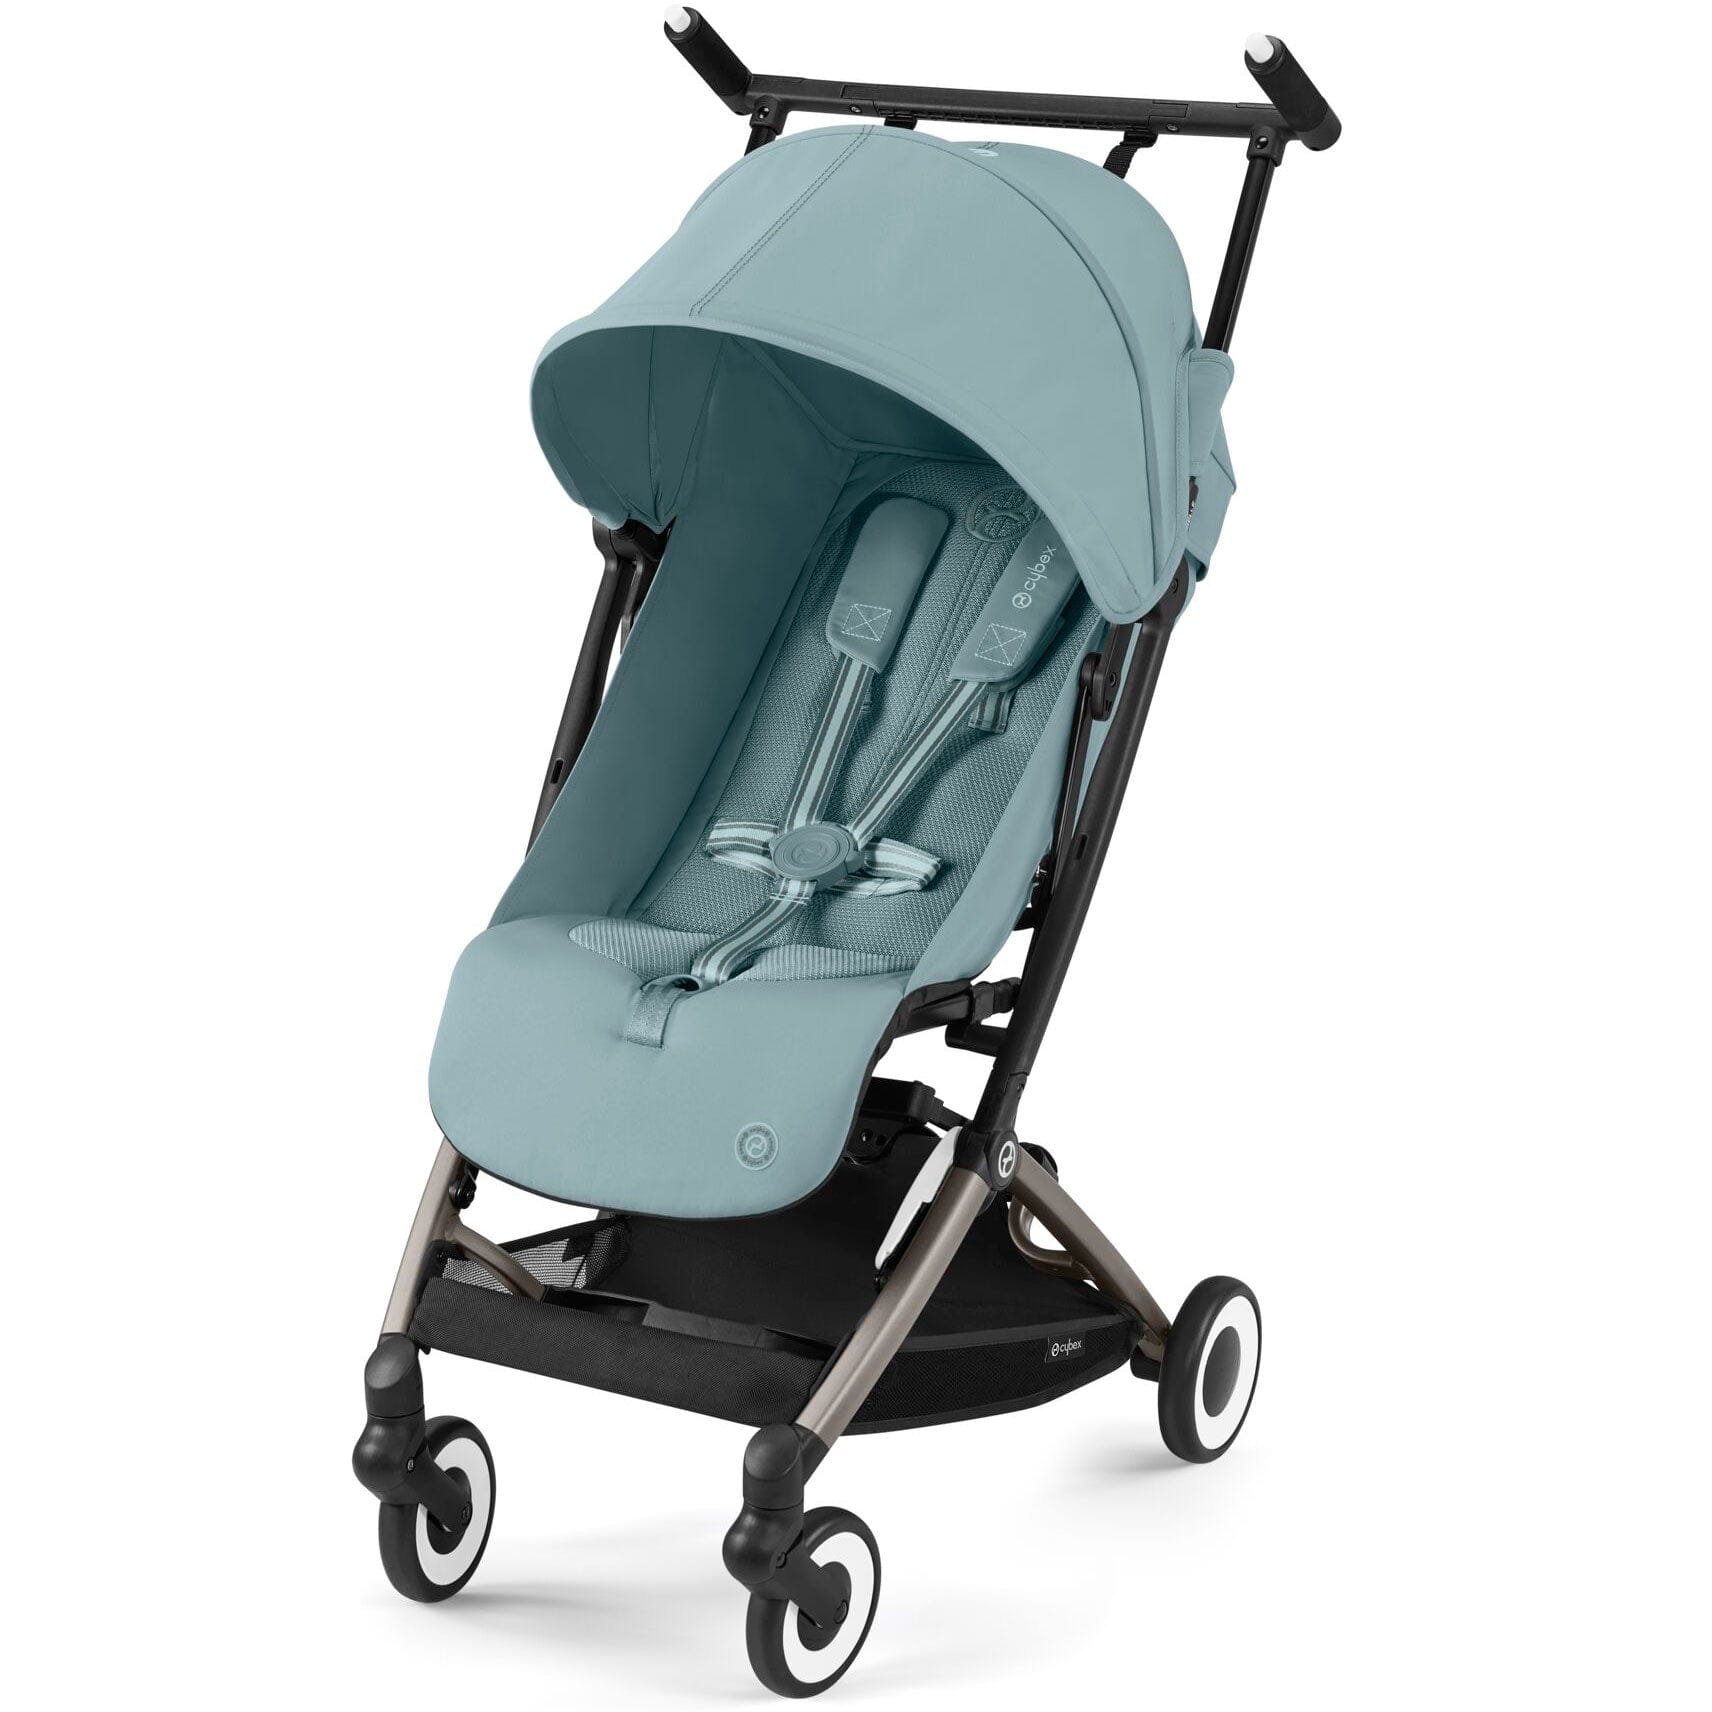 Cybex Libelle in Stormy Blue Pushchairs & Buggies 524000243 4063846451364